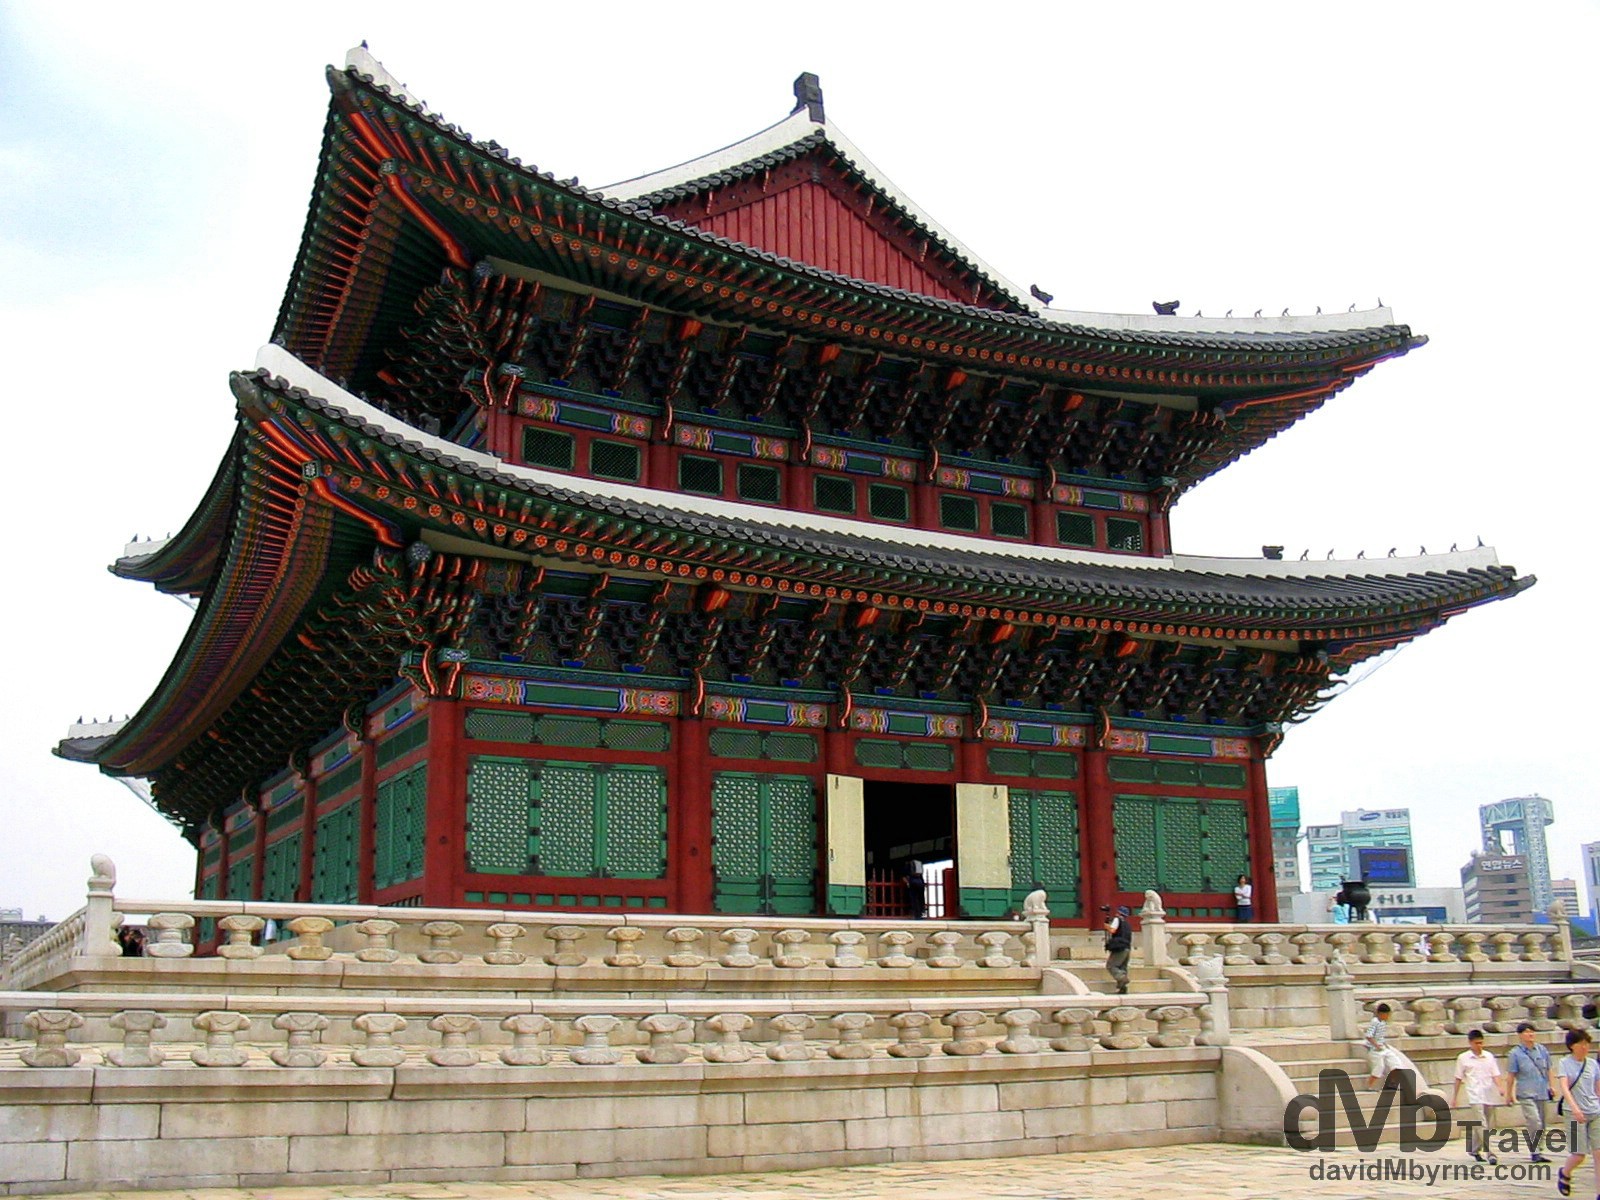 The grounds of Gyeongbokgung, the Grand Palace, Seoul, South Korea. August 15th 2004